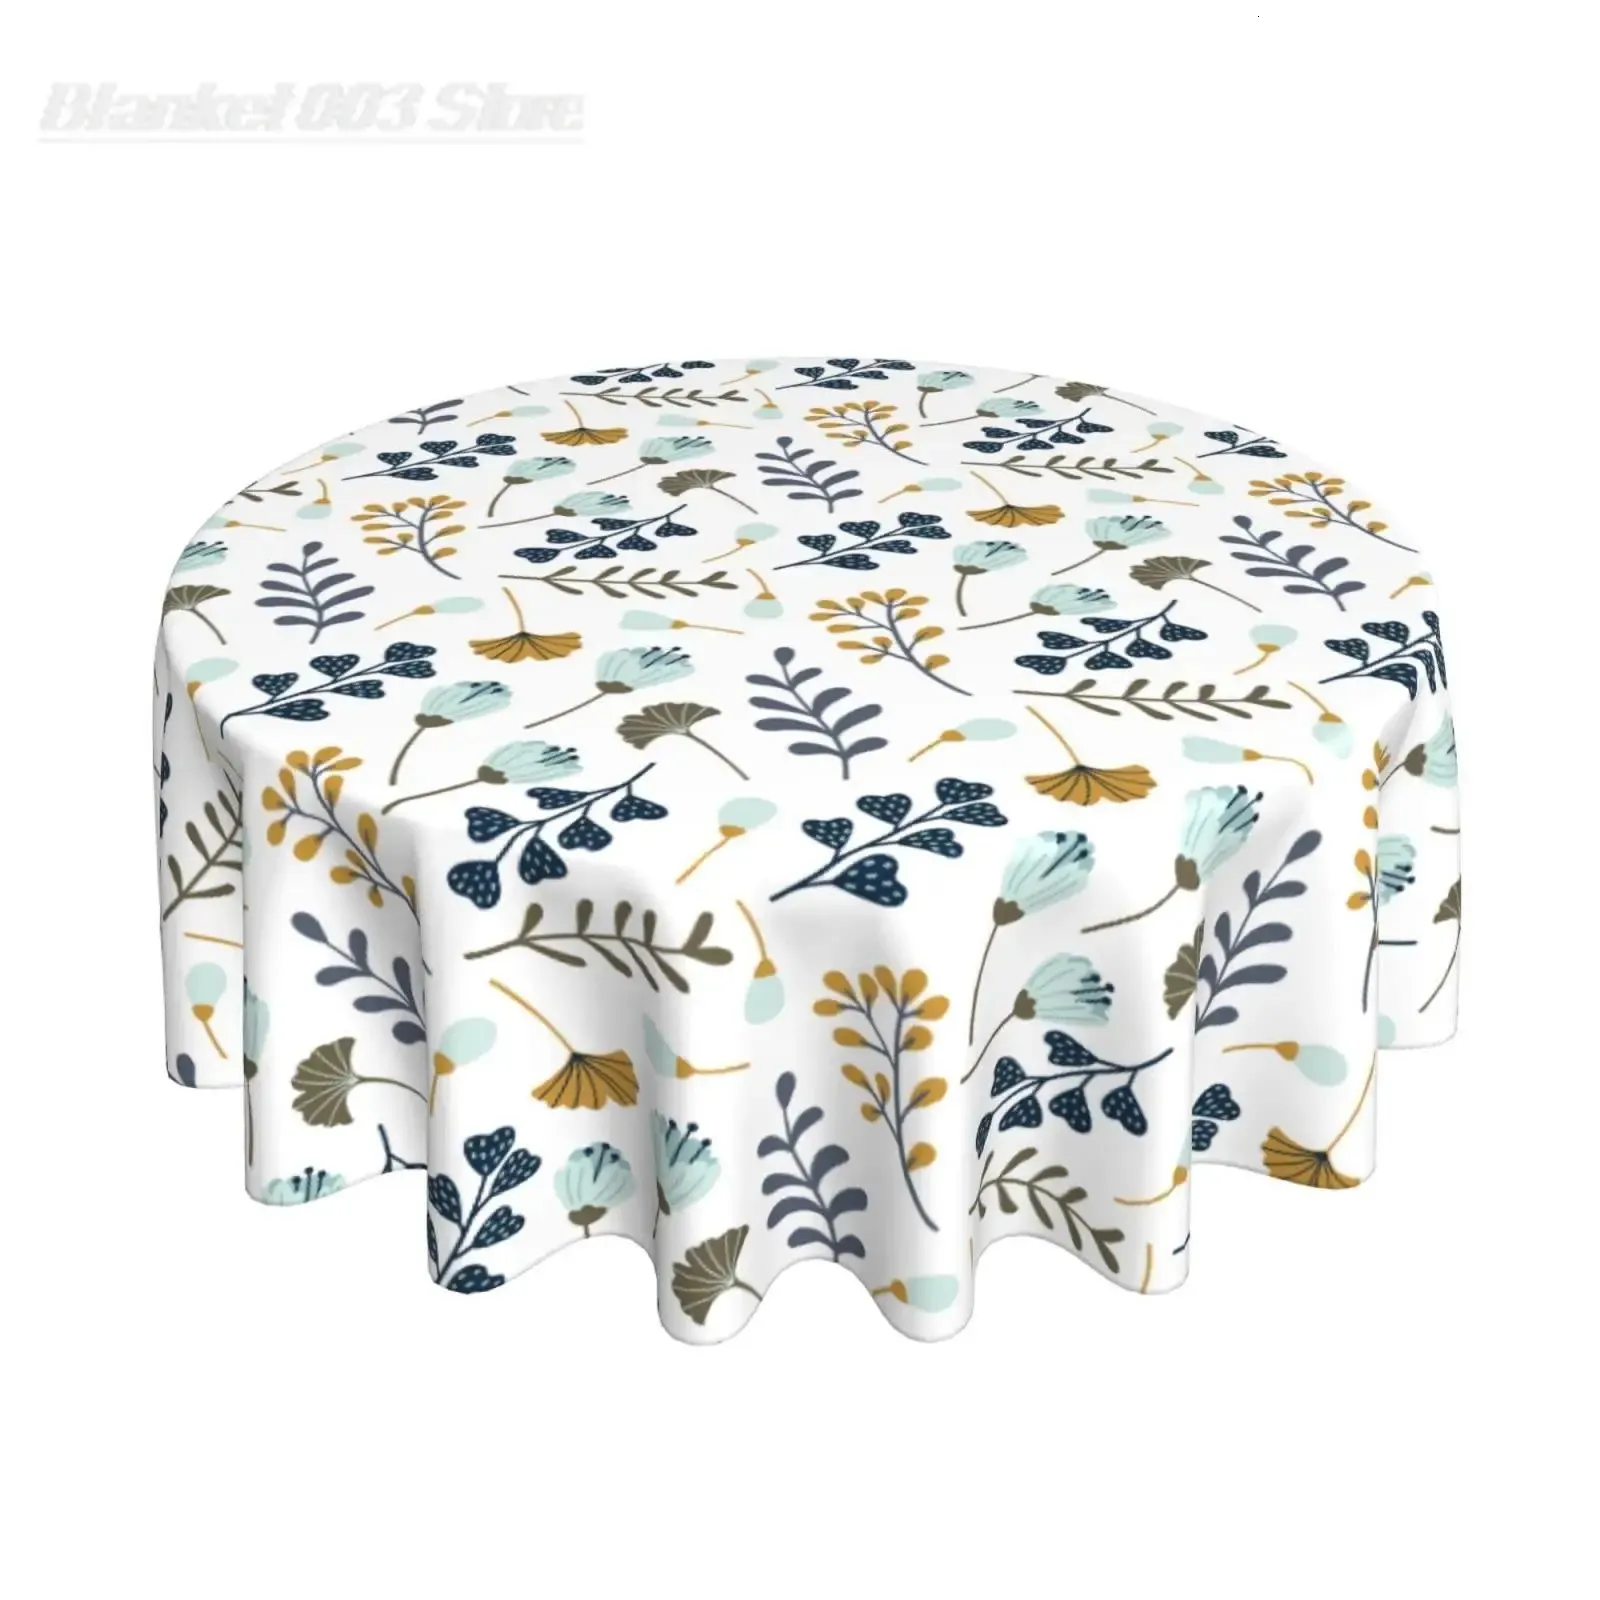 Disposable Table Covers Blue Grey White Floral Leaves Round Tablecloth 60 Inch Spring Summer Leaf Table Clothes Rustic Reusable Circle Table Cover for 231206